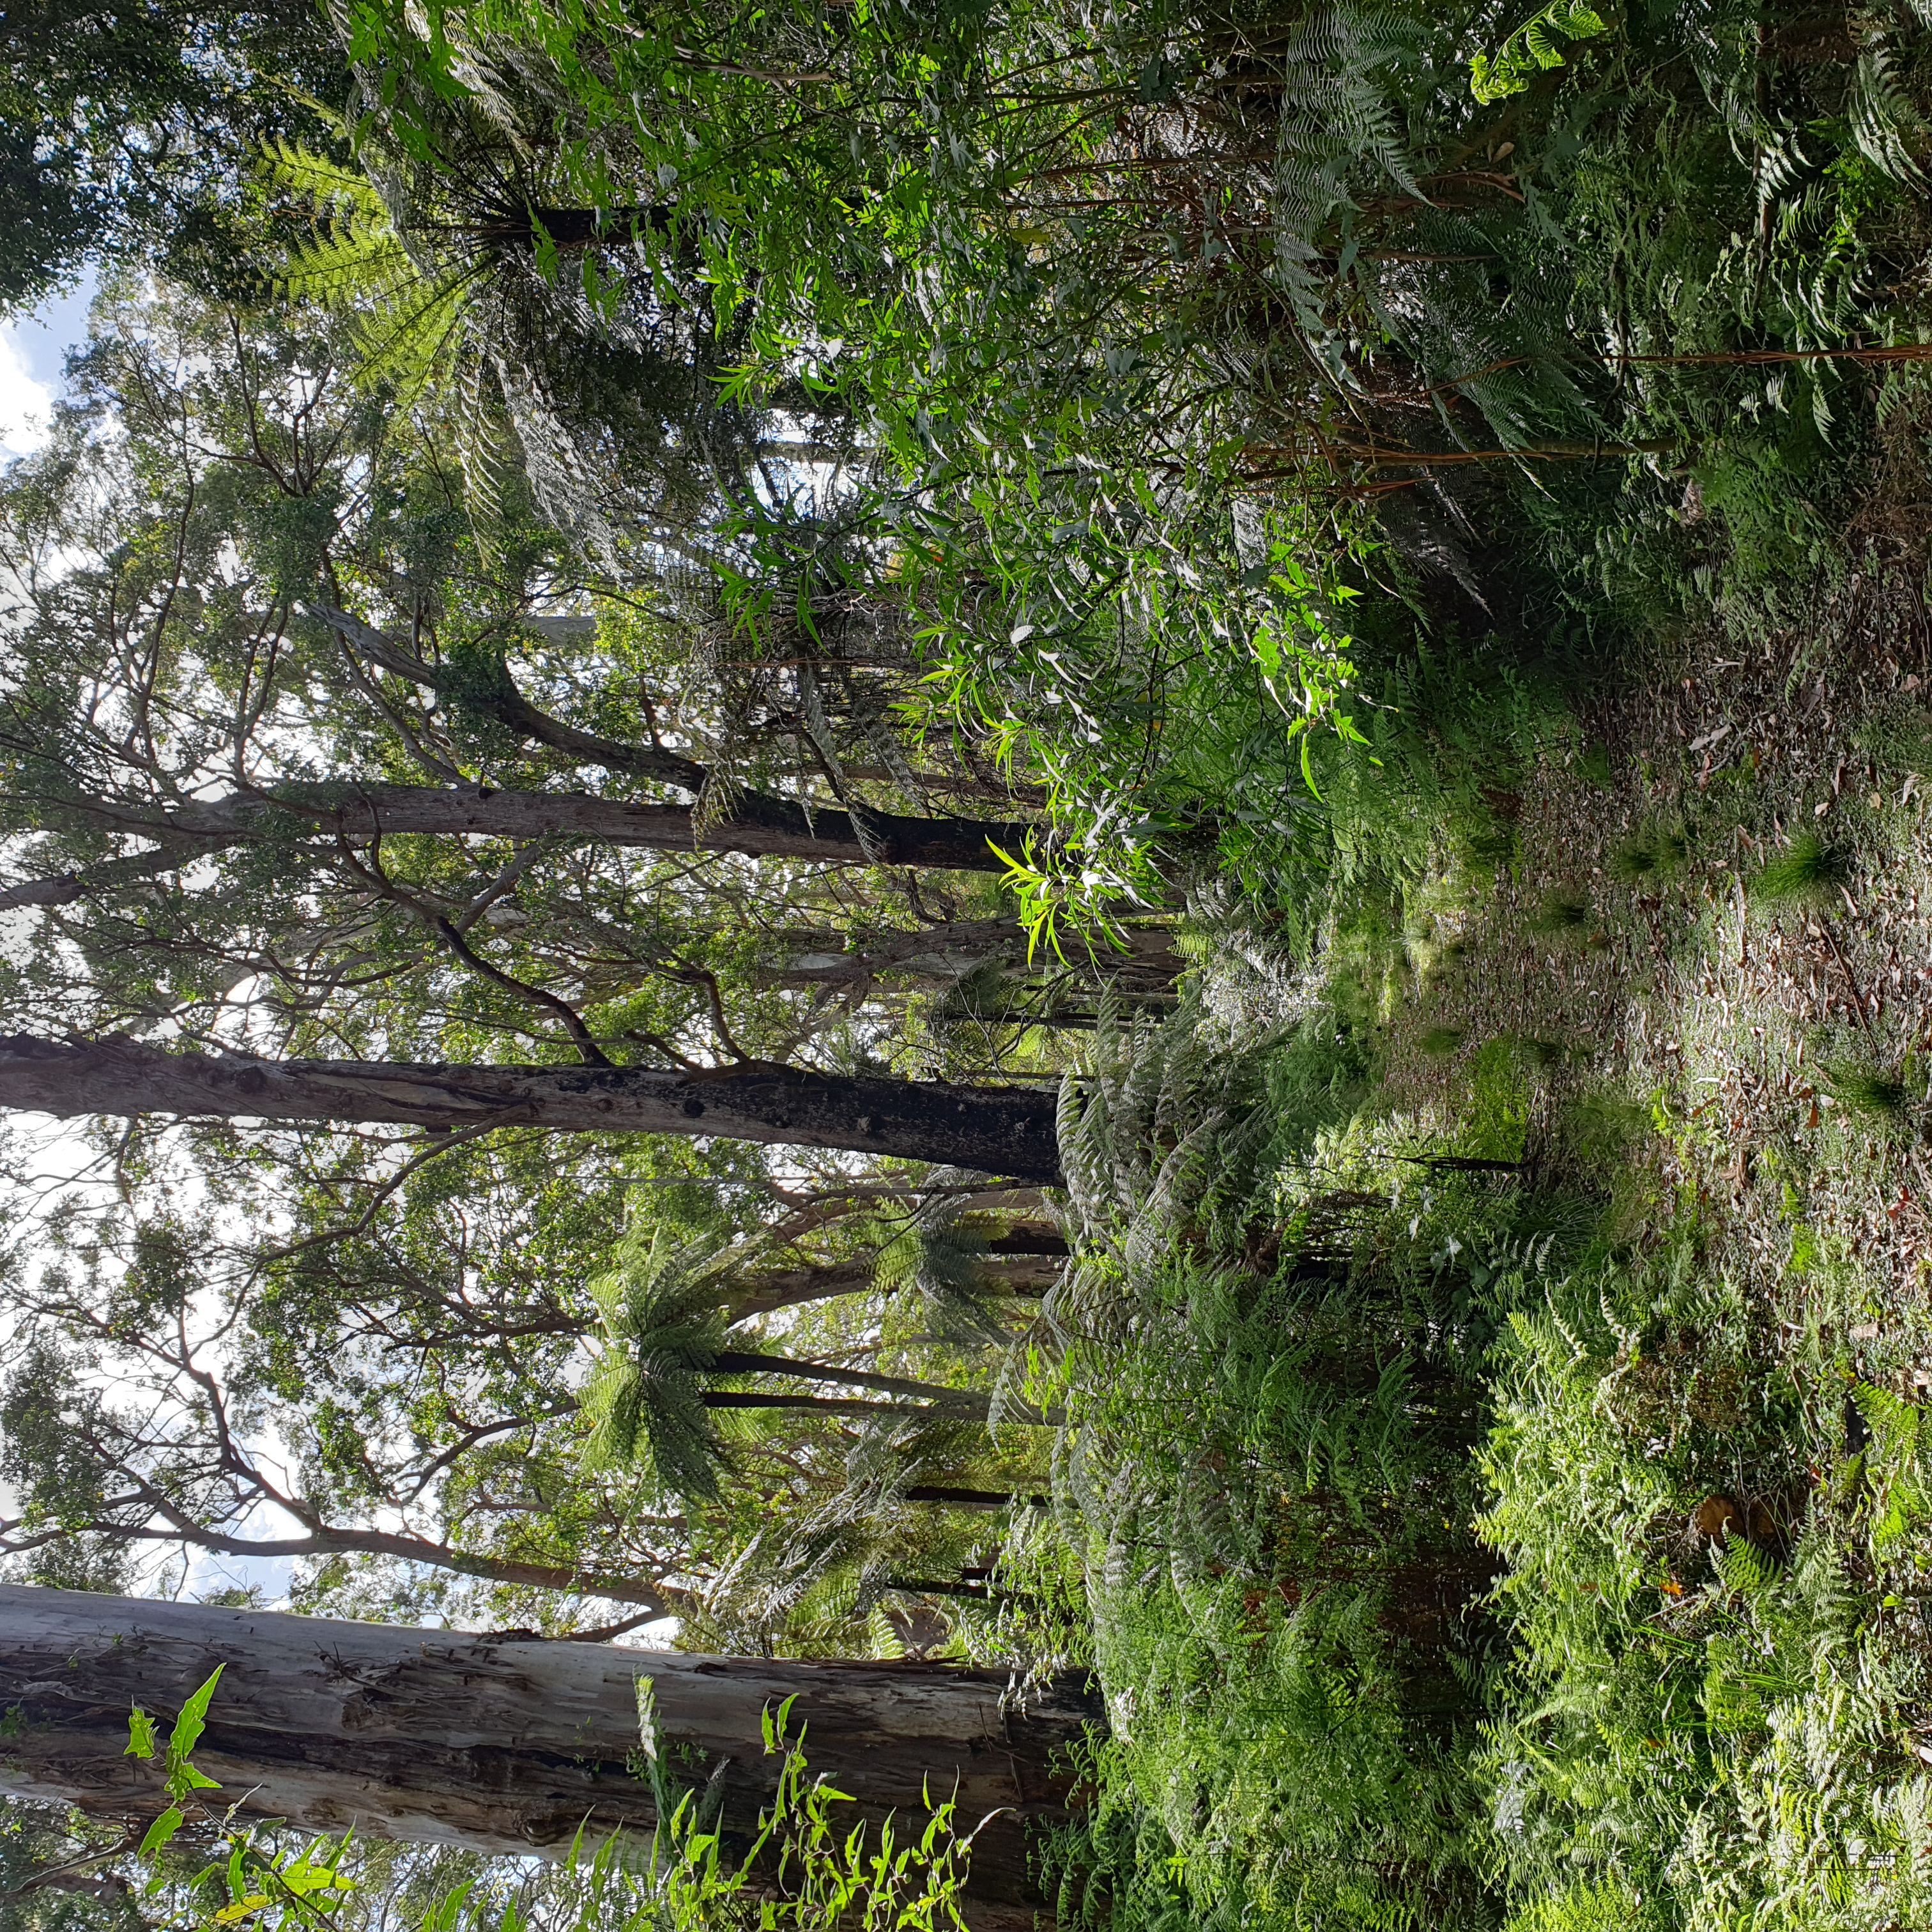 A lovely walk amongst huge tree ferns in an old growth eucalypt forest